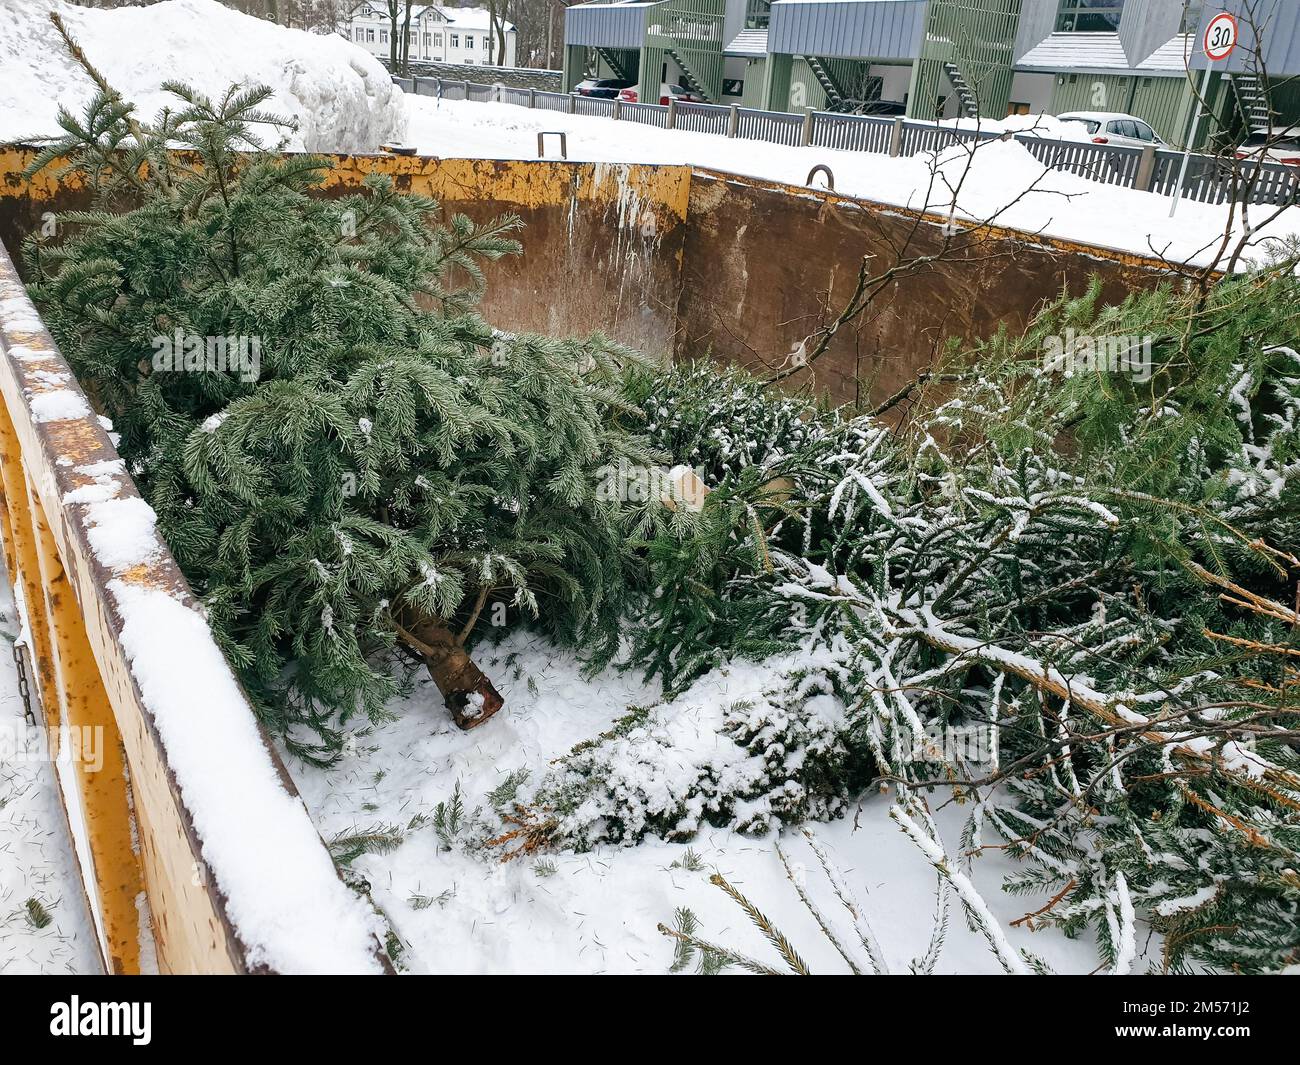 Tallinn, Estonia - January 22, 2022: Large garbage container on a city street for people to bring their old Christmas trees in. Free municipal service Stock Photo